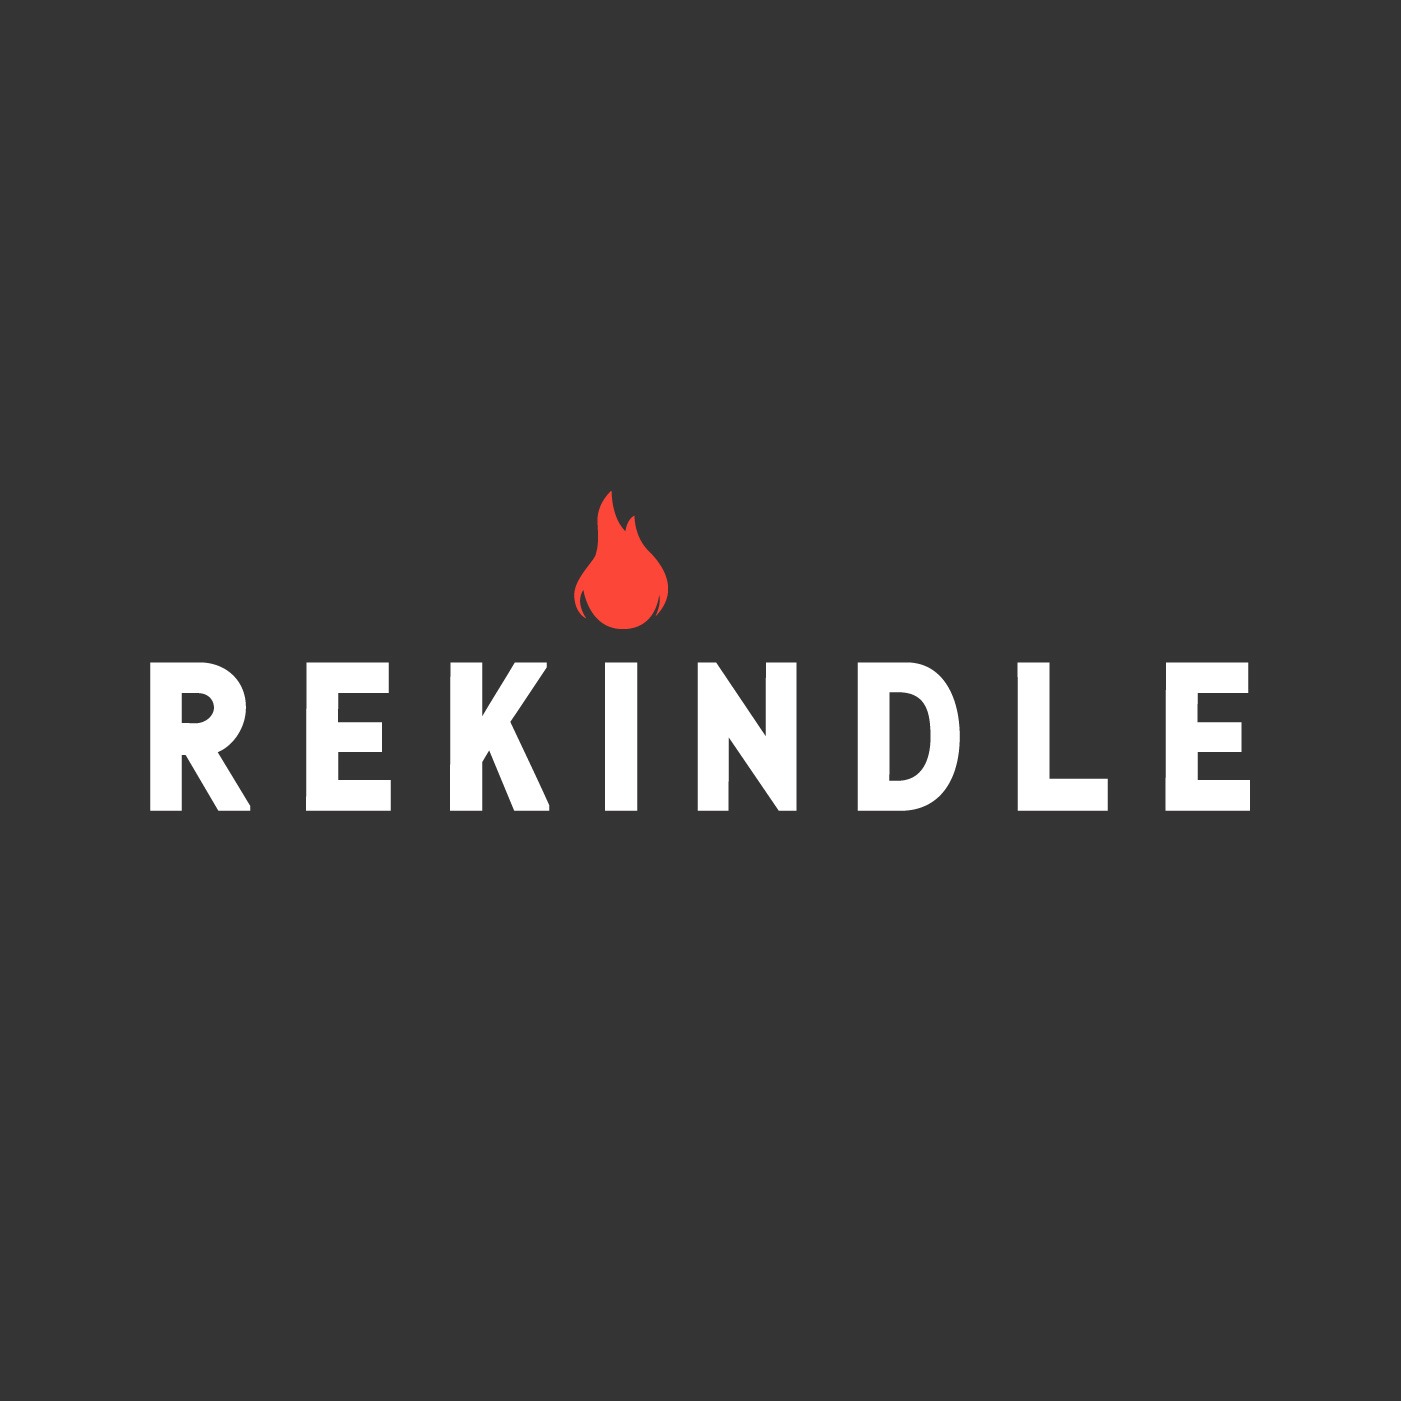 Rekindle | Disappointment and Hope